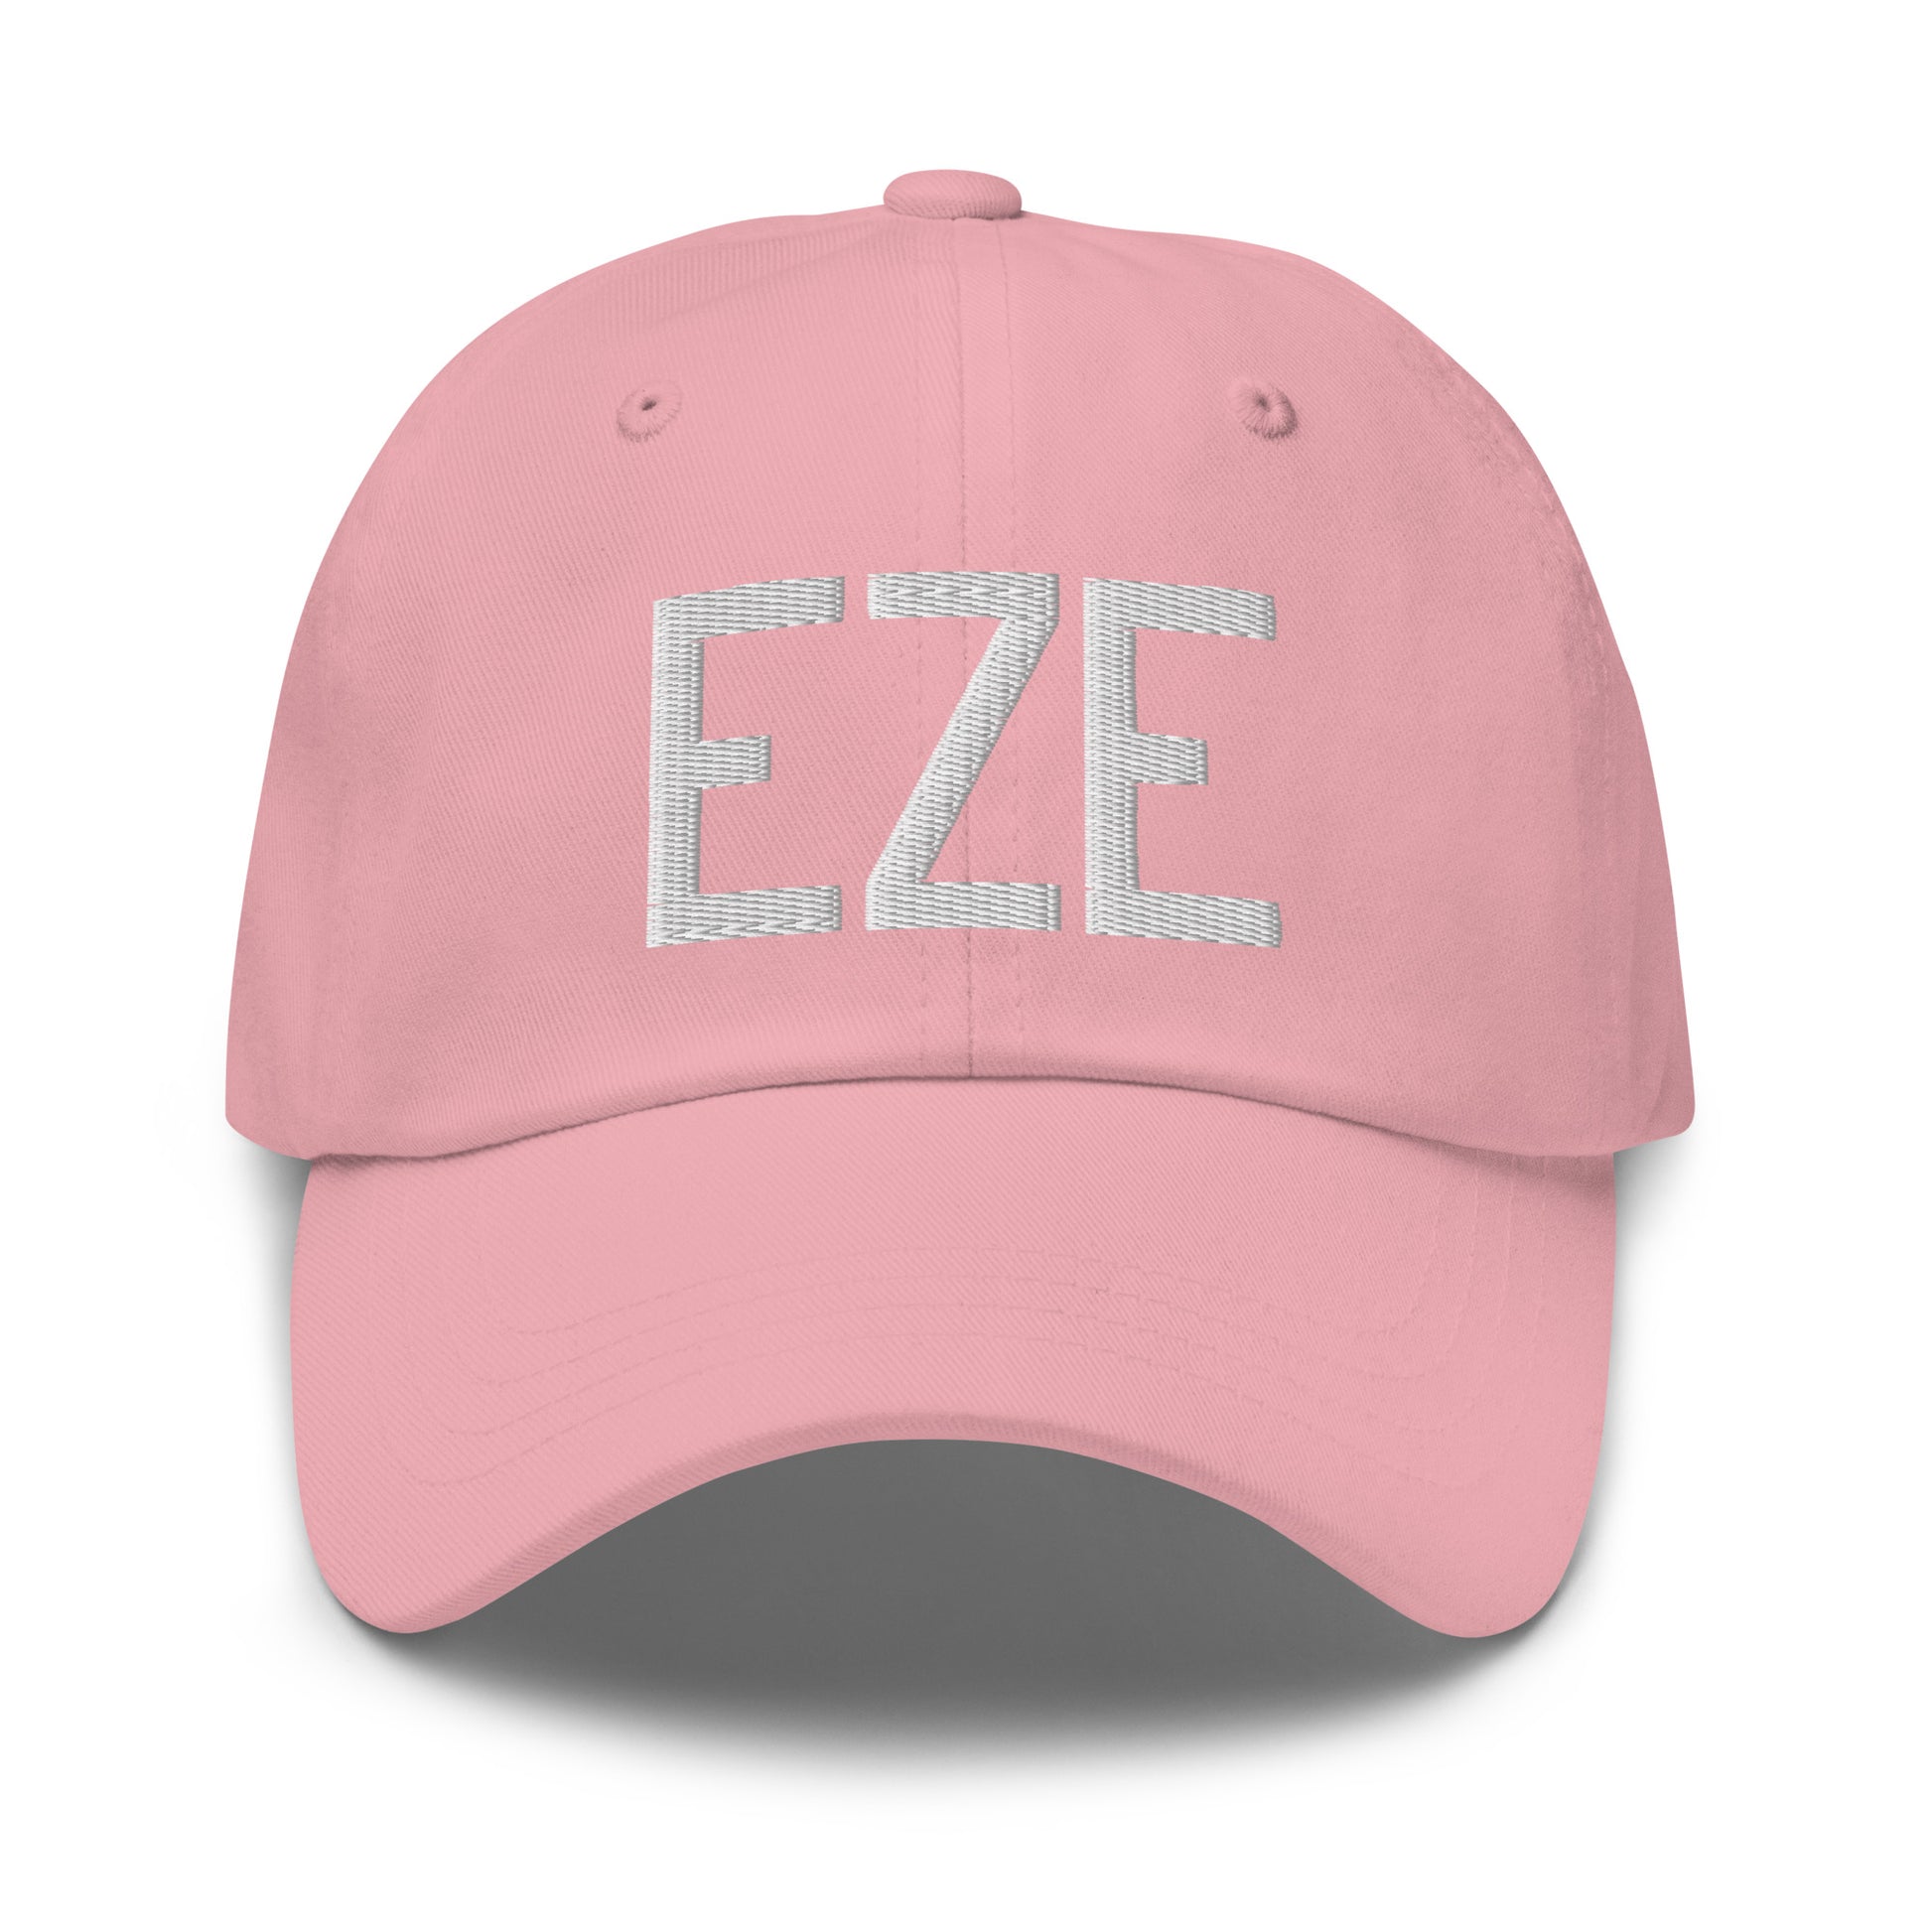 Airport Code Baseball Cap - White • EZE Buenos Aires • YHM Designs - Image 25